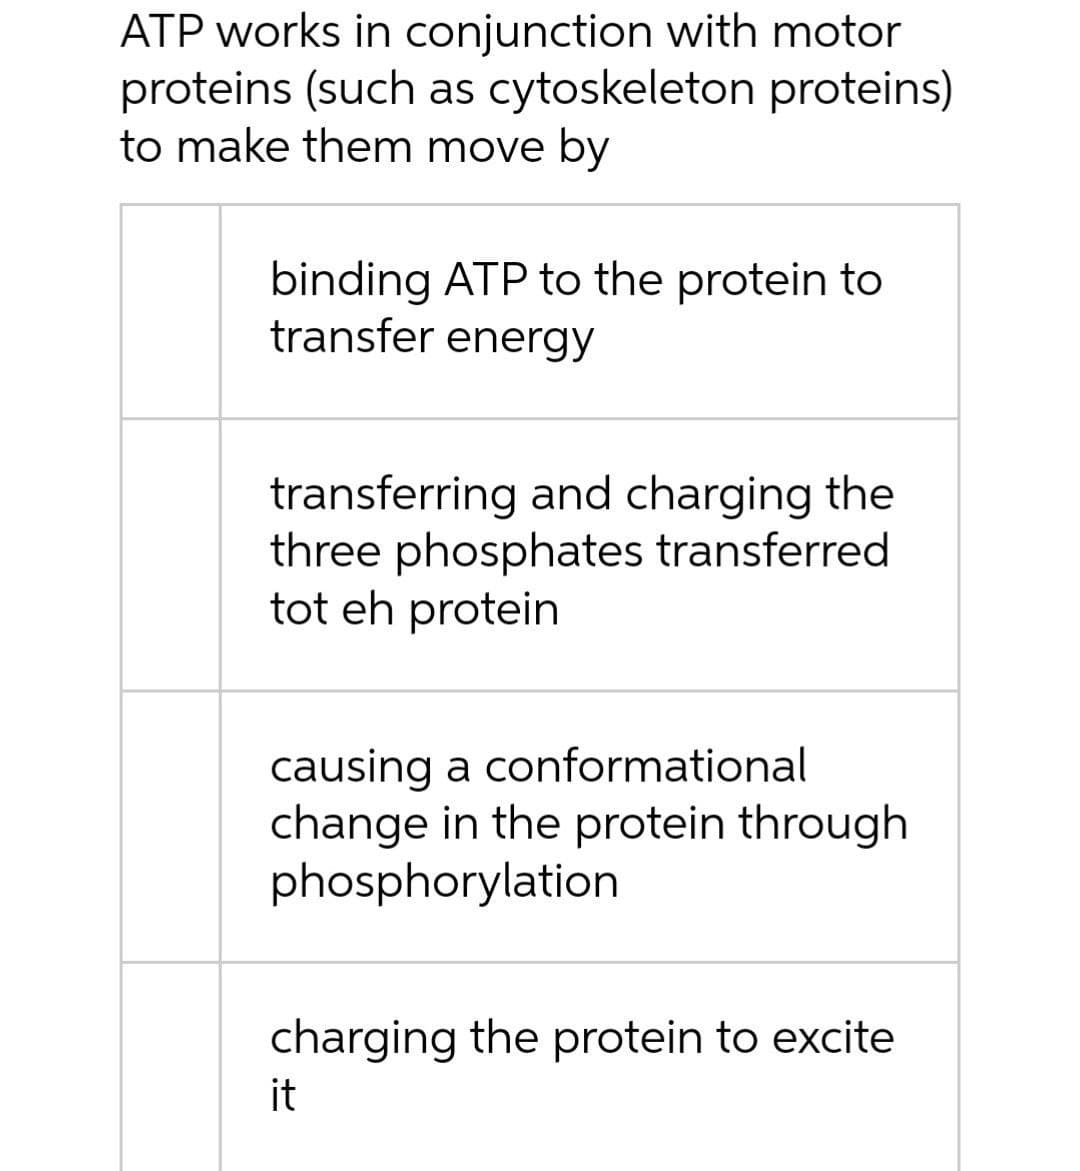 ATP works in conjunction with motor
proteins (such as cytoskeleton proteins)
to make them move by
binding ATP to the protein to
transfer energy
transferring and charging the
three phosphates transferred
tot eh protein
causing a conformational
change in the protein through
phosphorylation
charging the protein to excite
it
